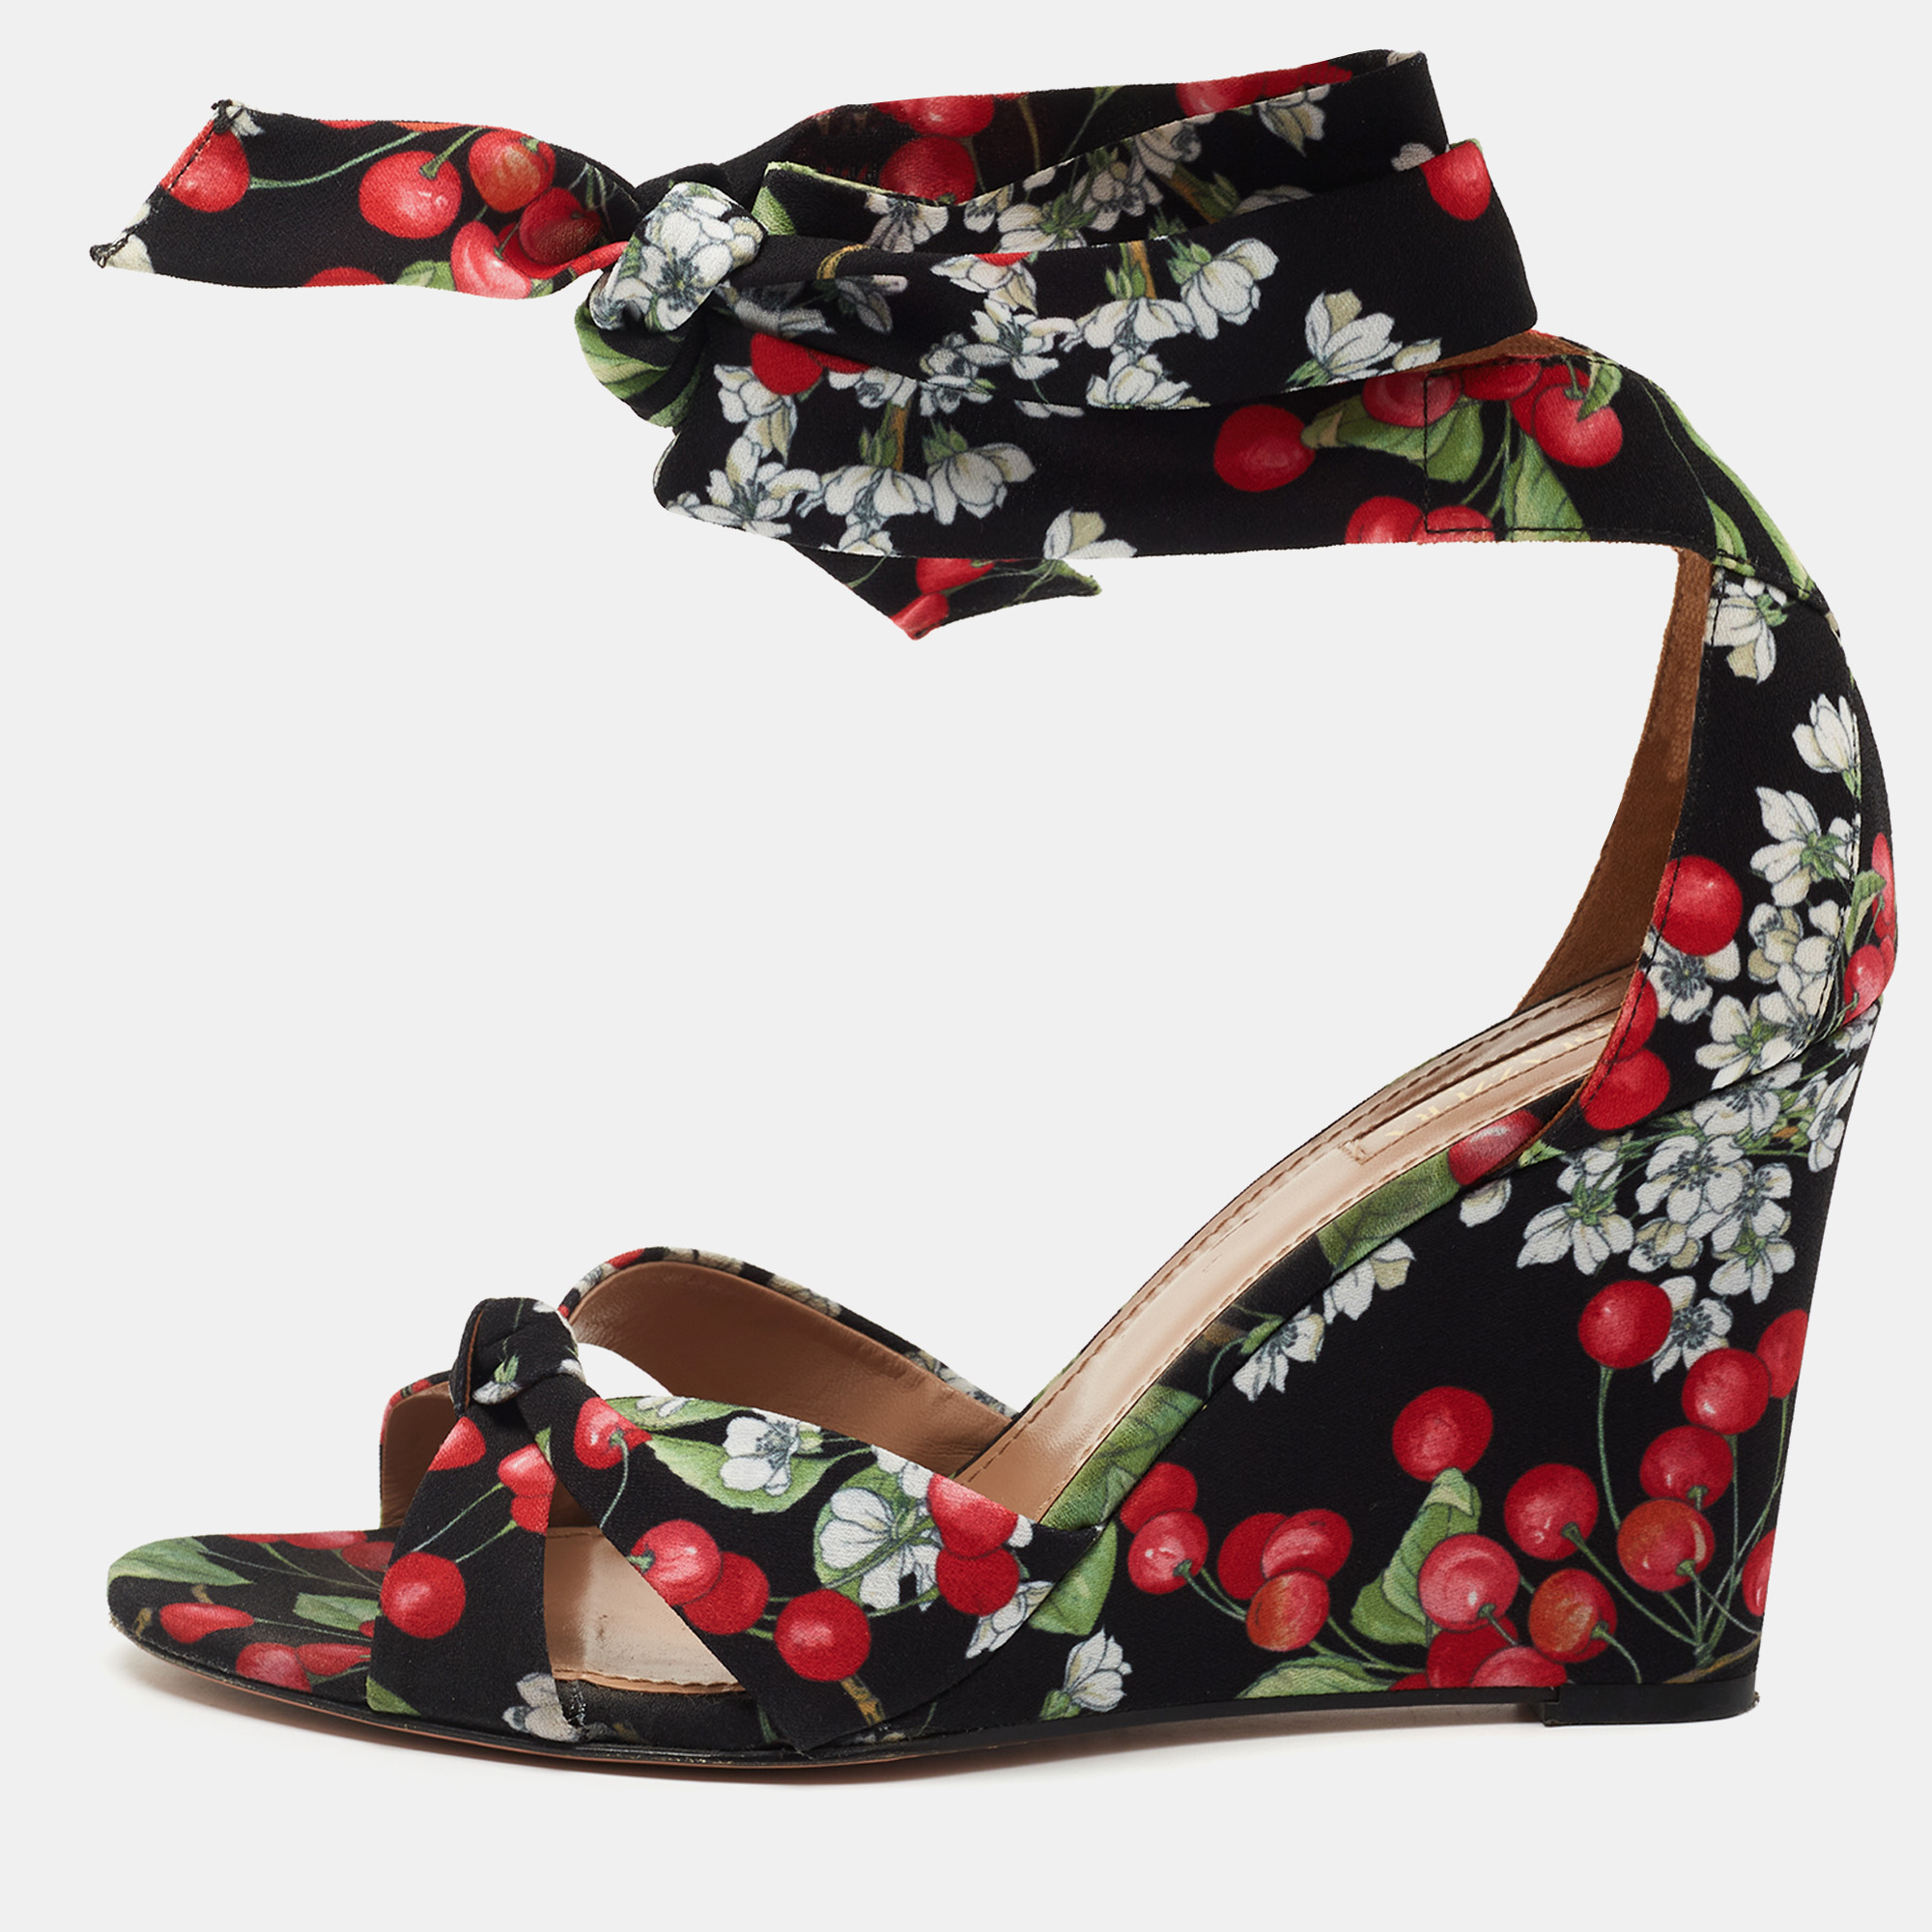 Pre-owned Aquazzura Multicolor Fabric Cherry Blossom Print Wedge Ankle Wrap Sandals Size 41